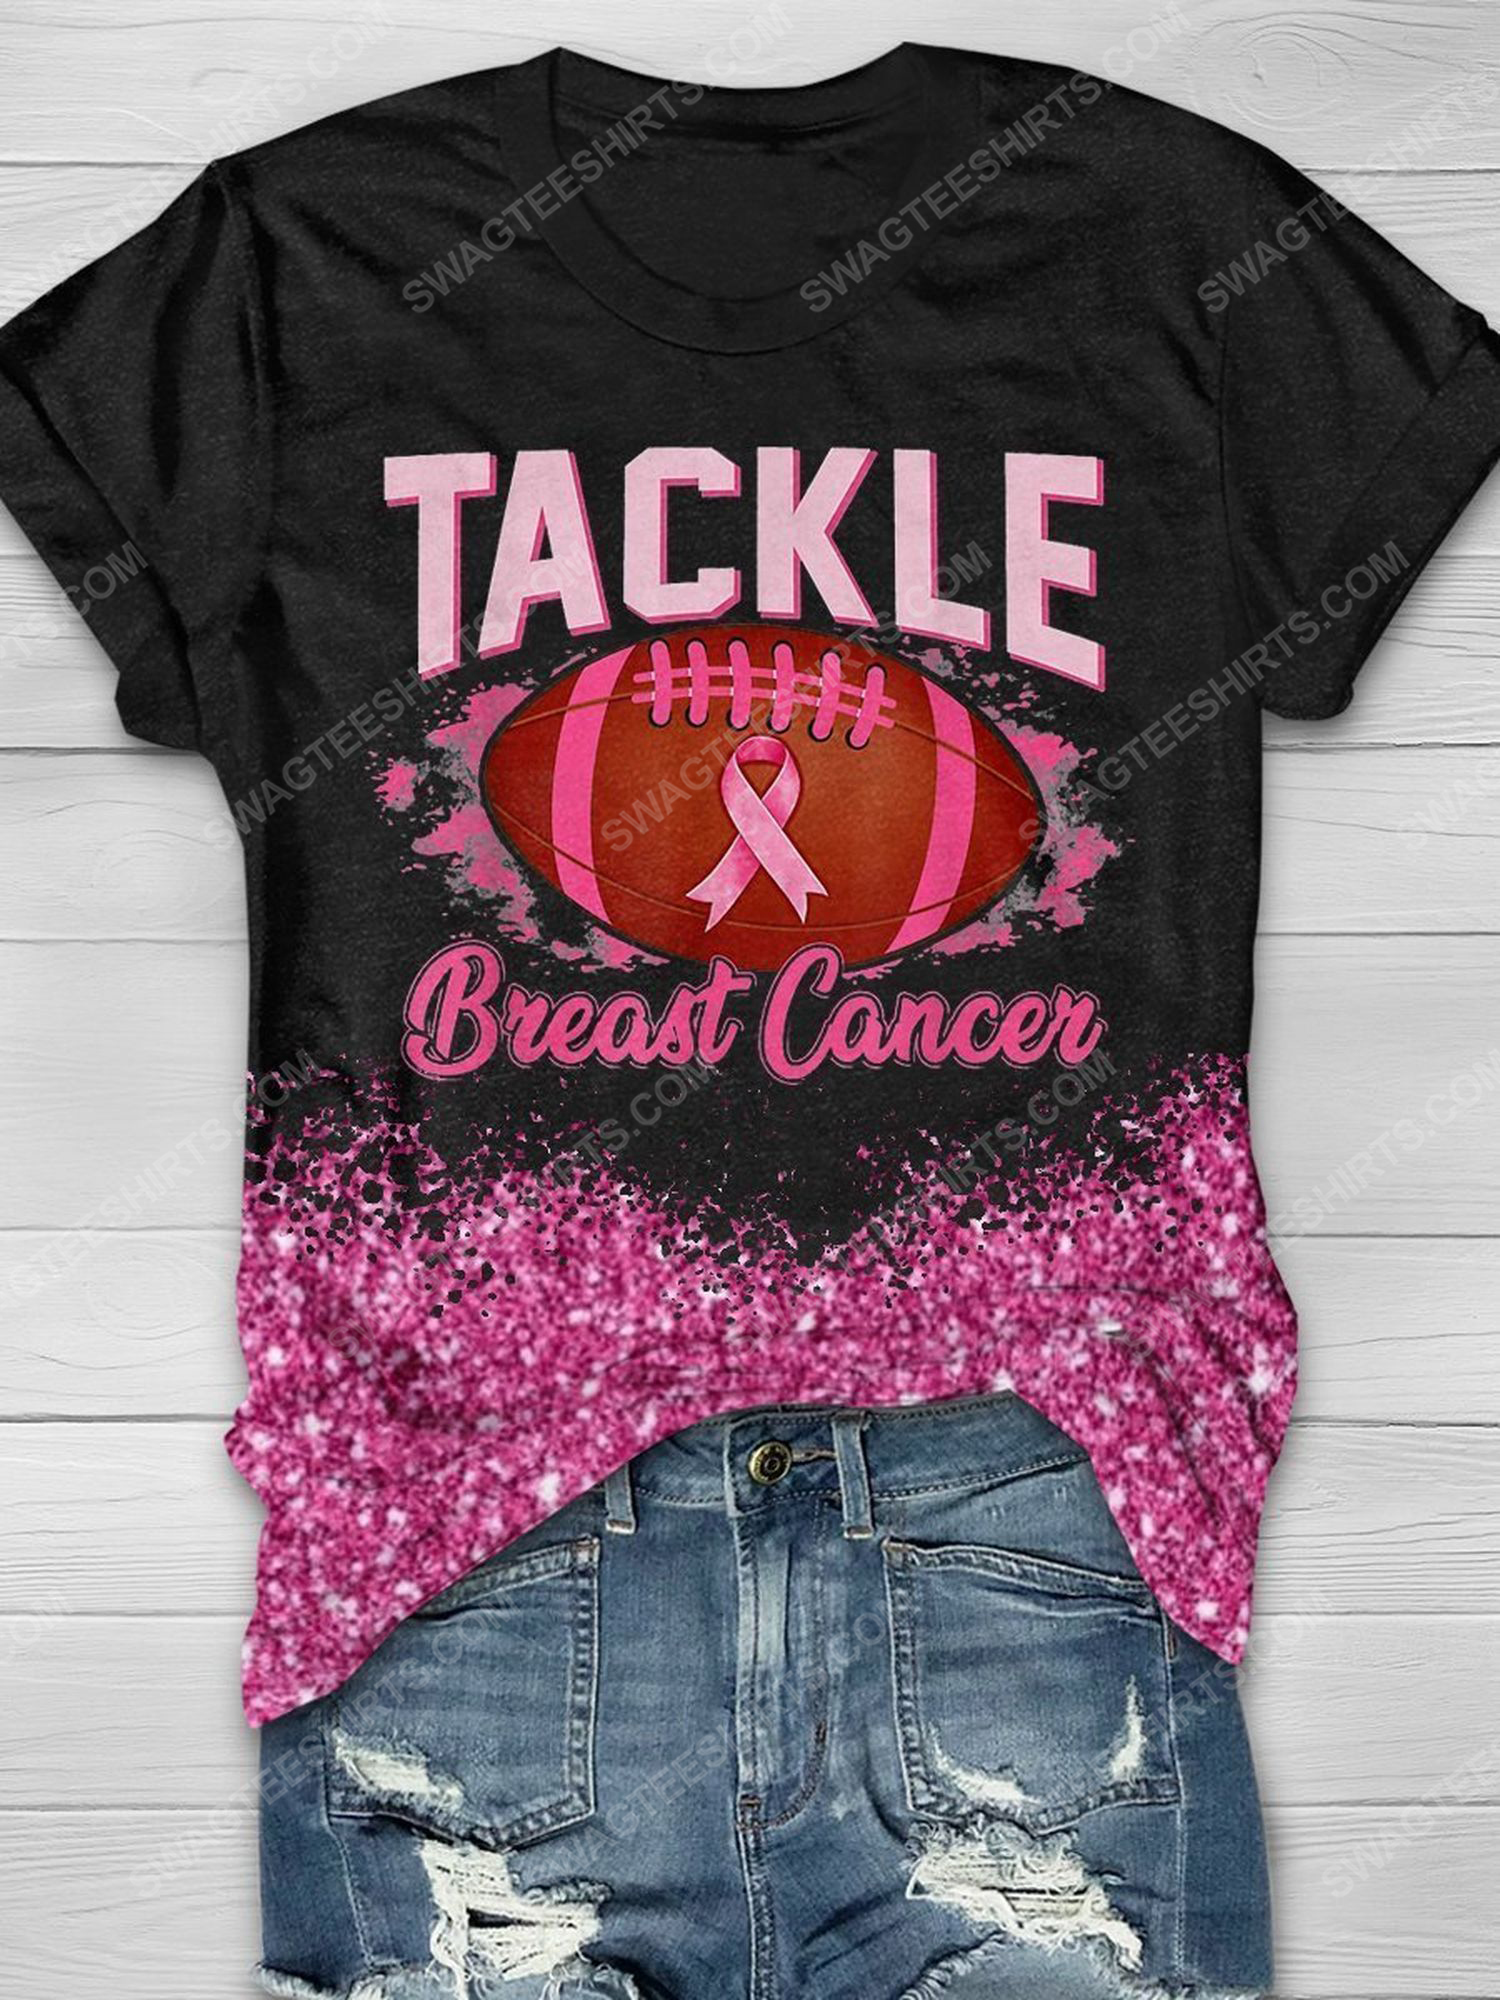 [special edition] Breast cancer awareness tackle football breast cancer full print shirt – maria (cancer)